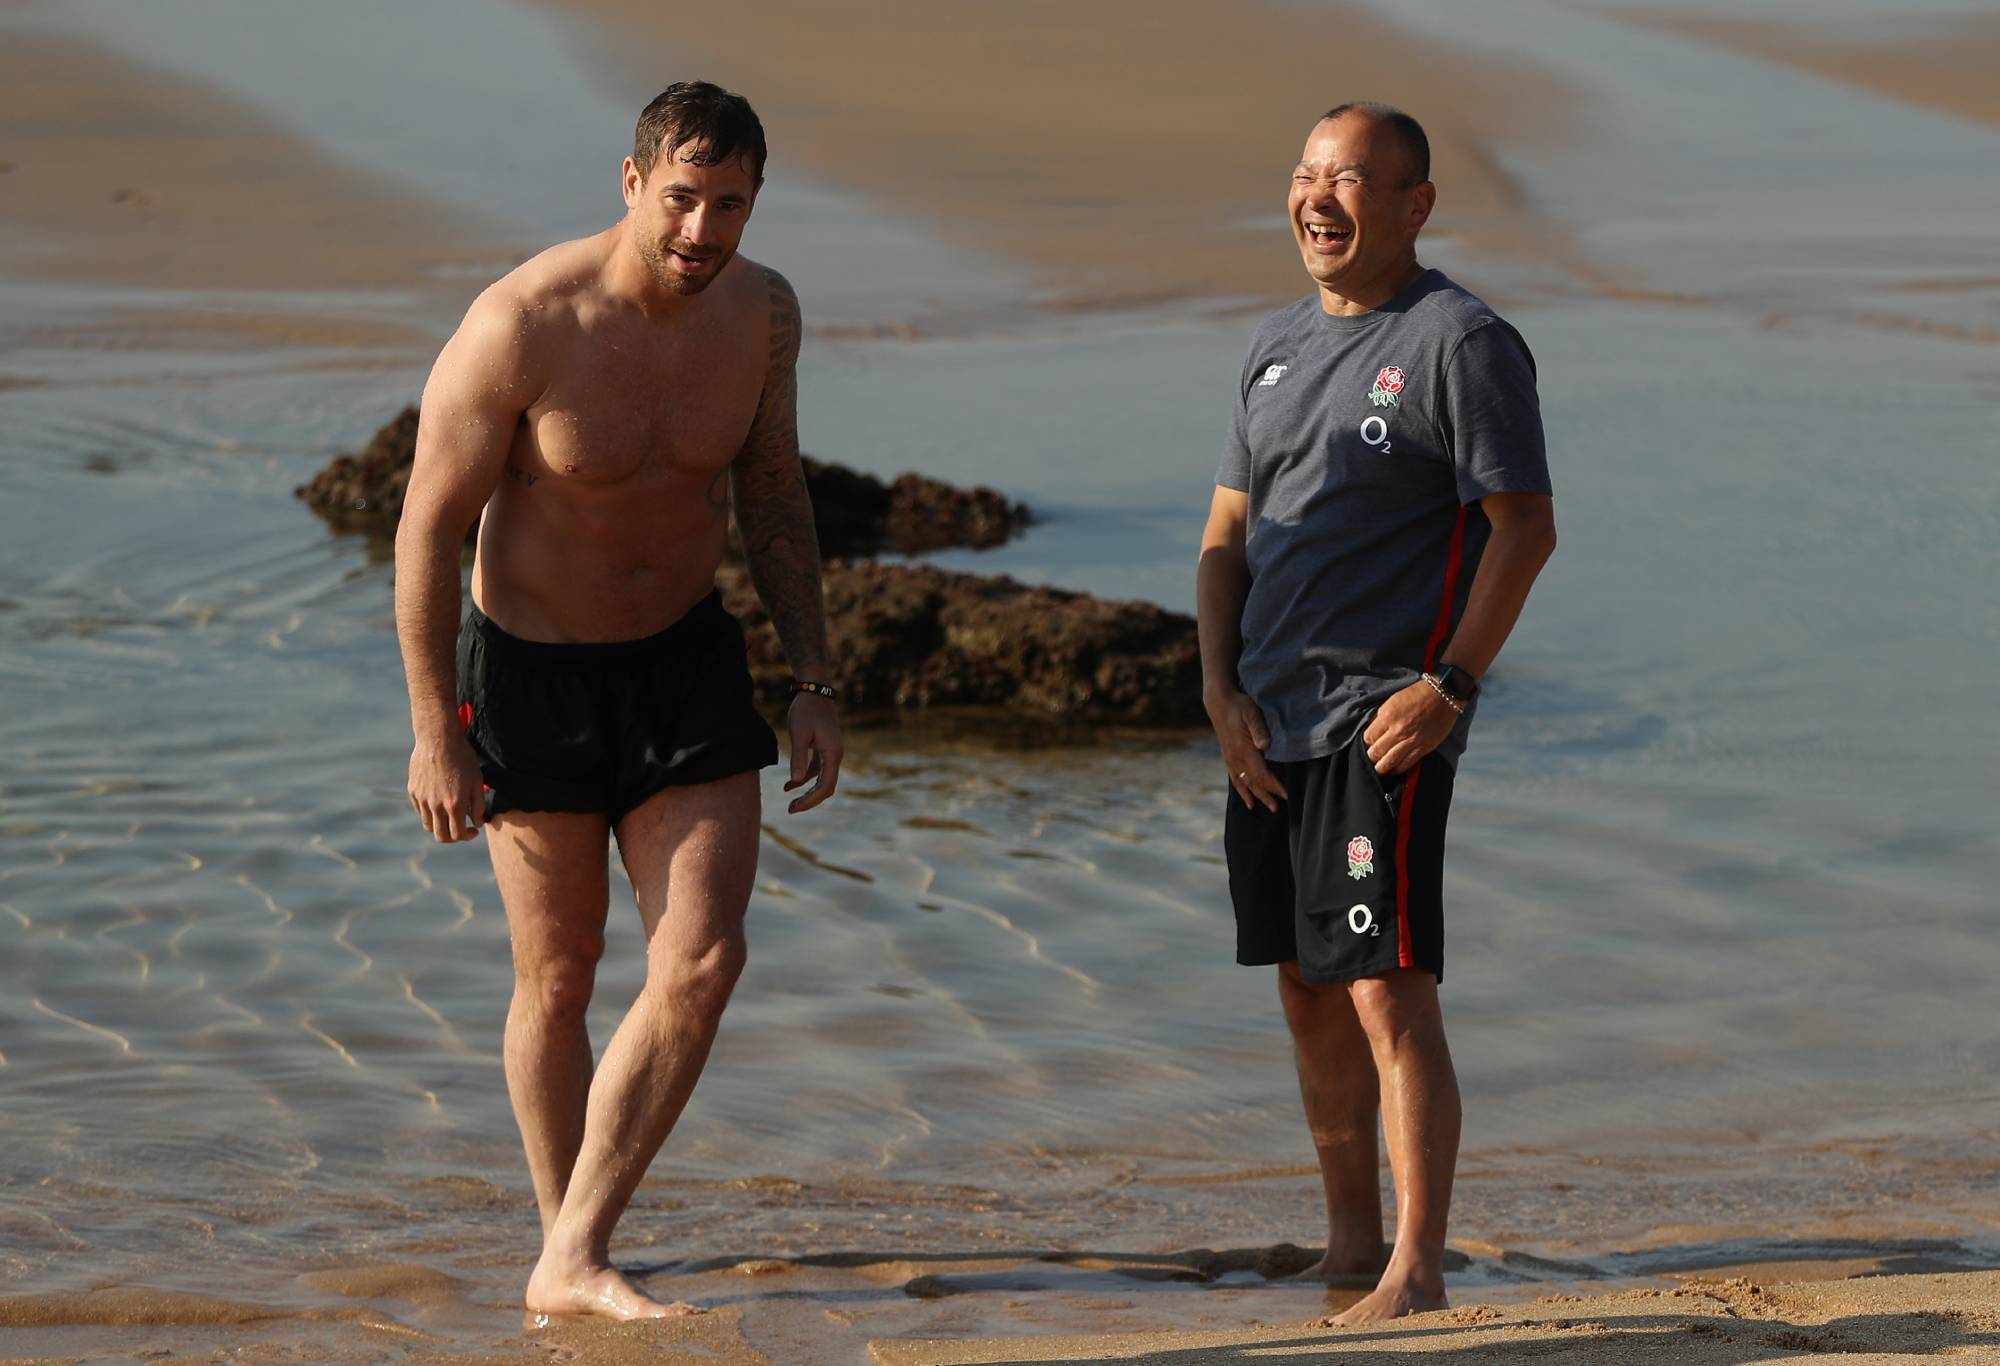 Eddie Jones (R) the England head coach laughs with Danny Cipriani during the England recovery session held on June 14, 2018 in Umhlanga Rocks, South Africa. (Photo by David Rogers/Getty Images)